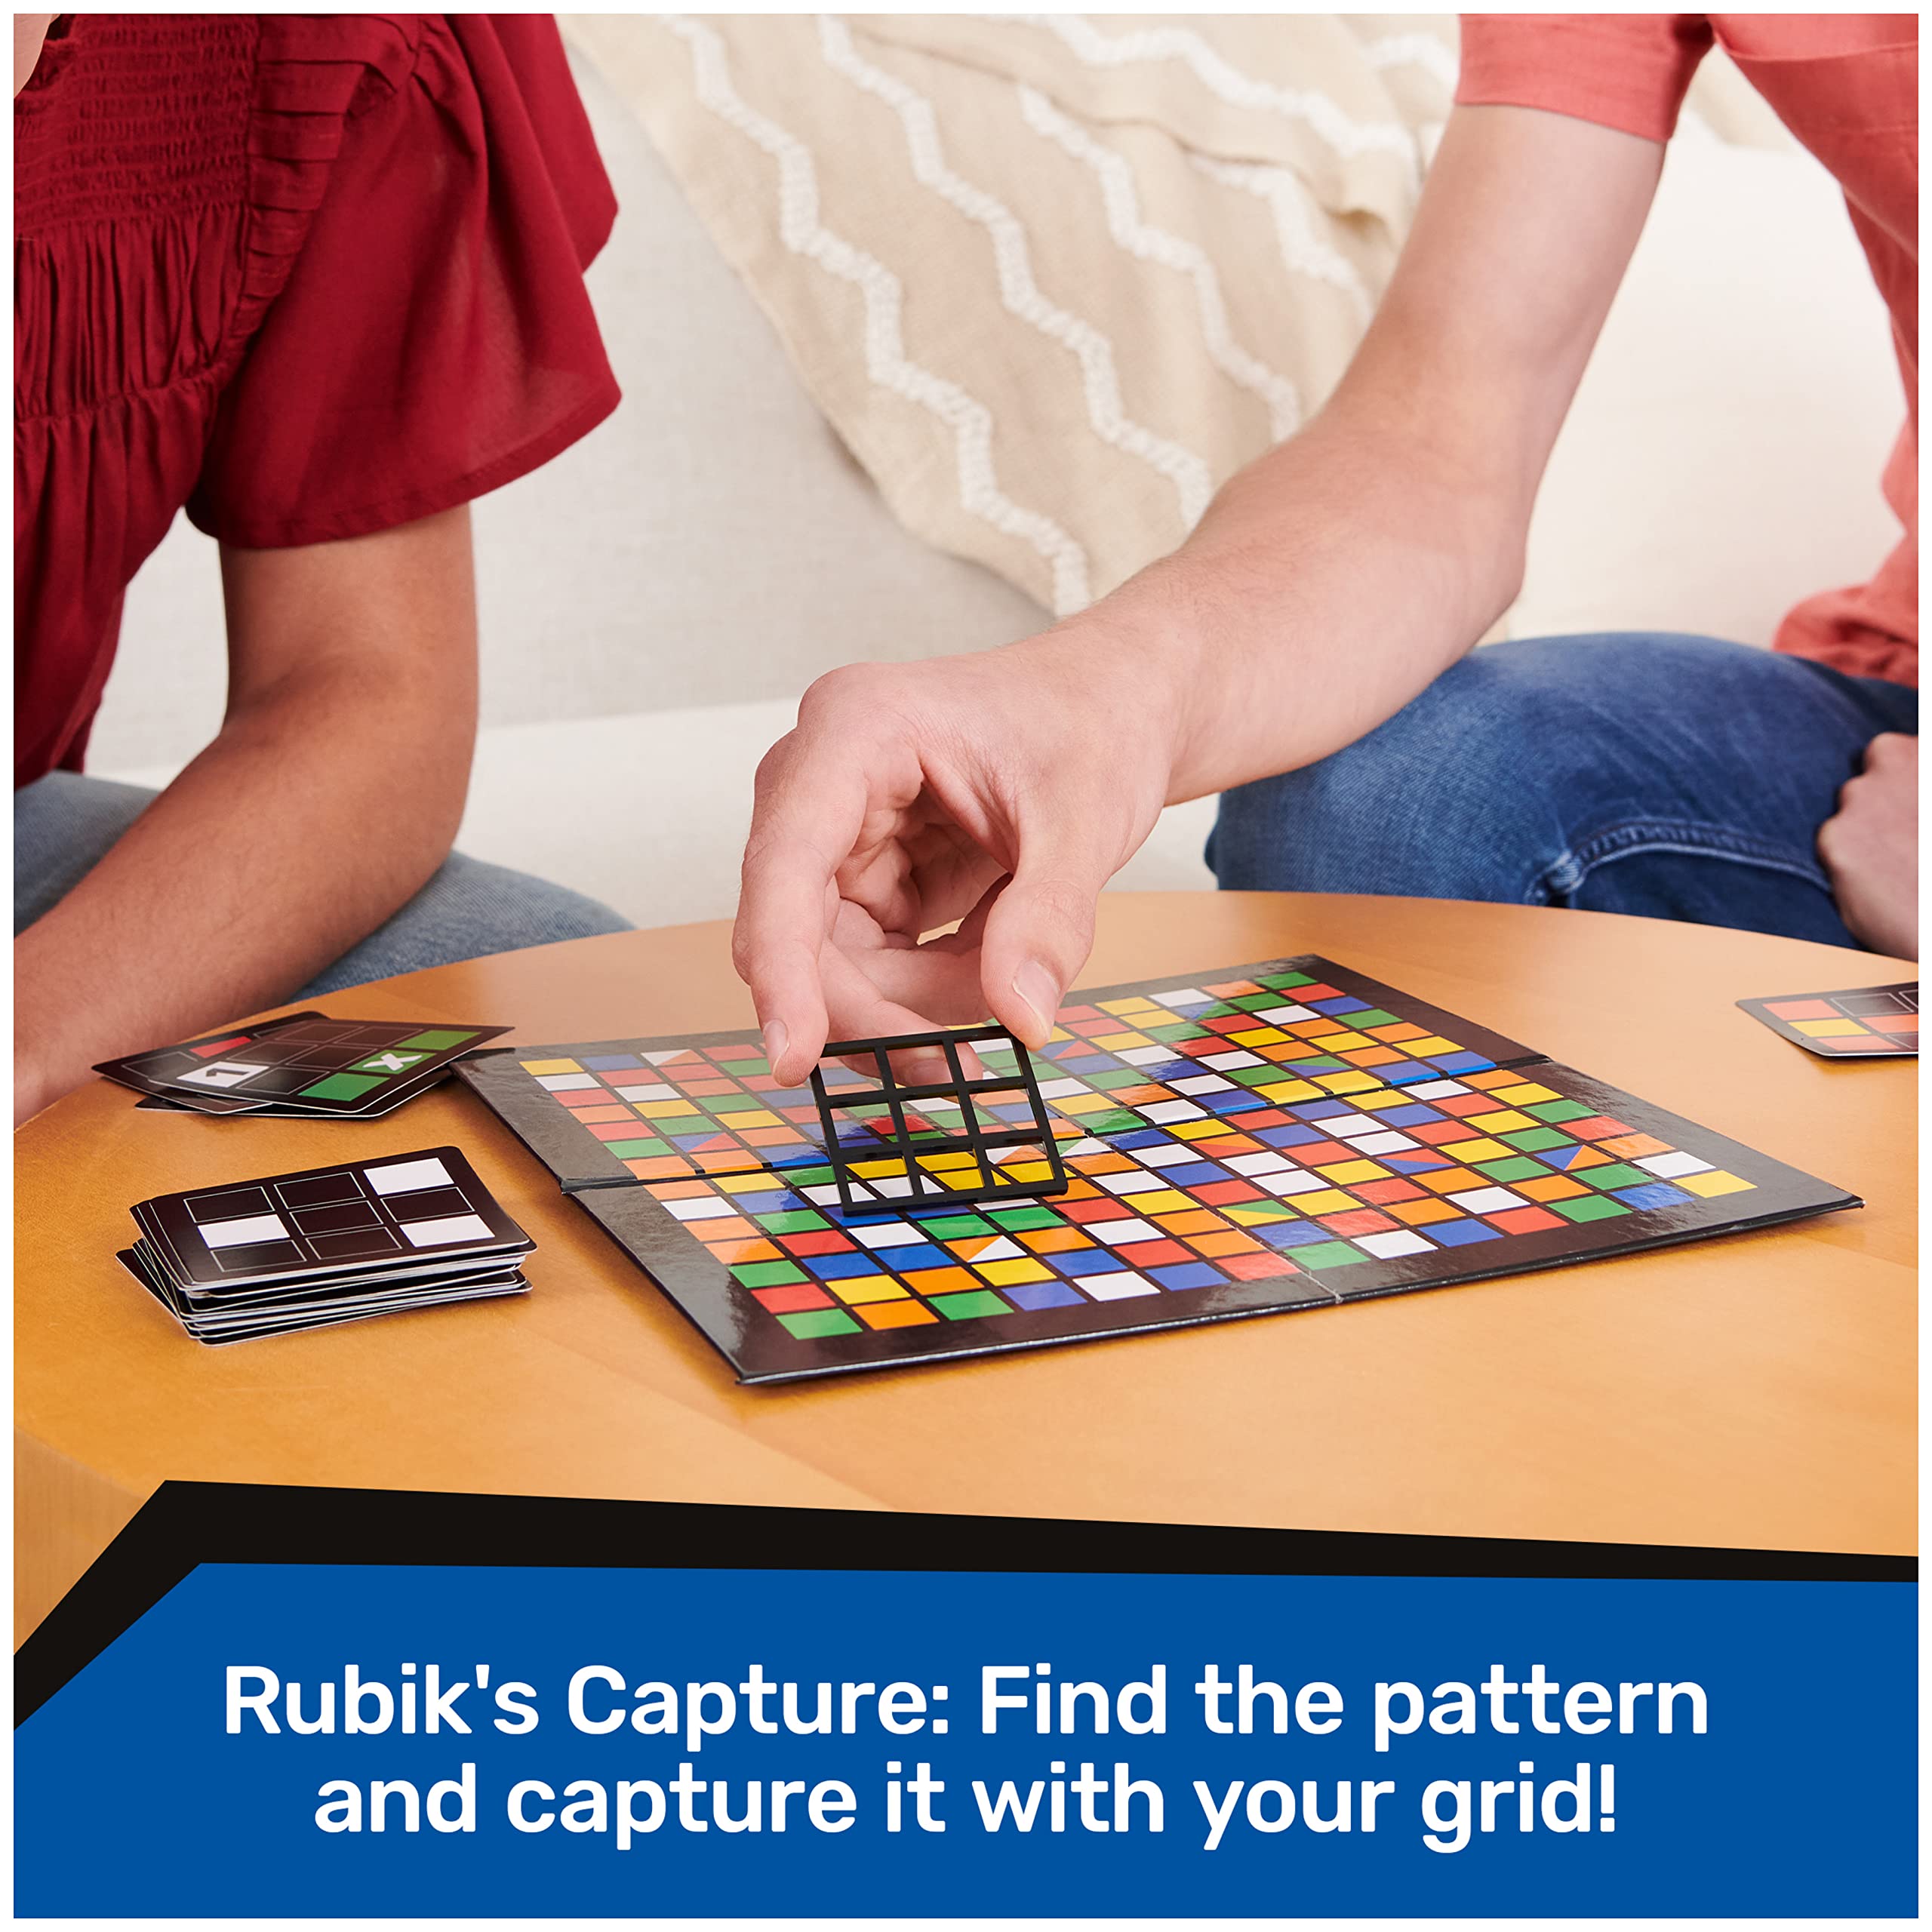 Rubik’s Pack & Go, 3 Game Bundle Race Flip Capture 2-Player Sequence Board Games 3D Puzzle Travel Game Gift Set, for Adults & Kids Ages 7+ Amazon Exclusive